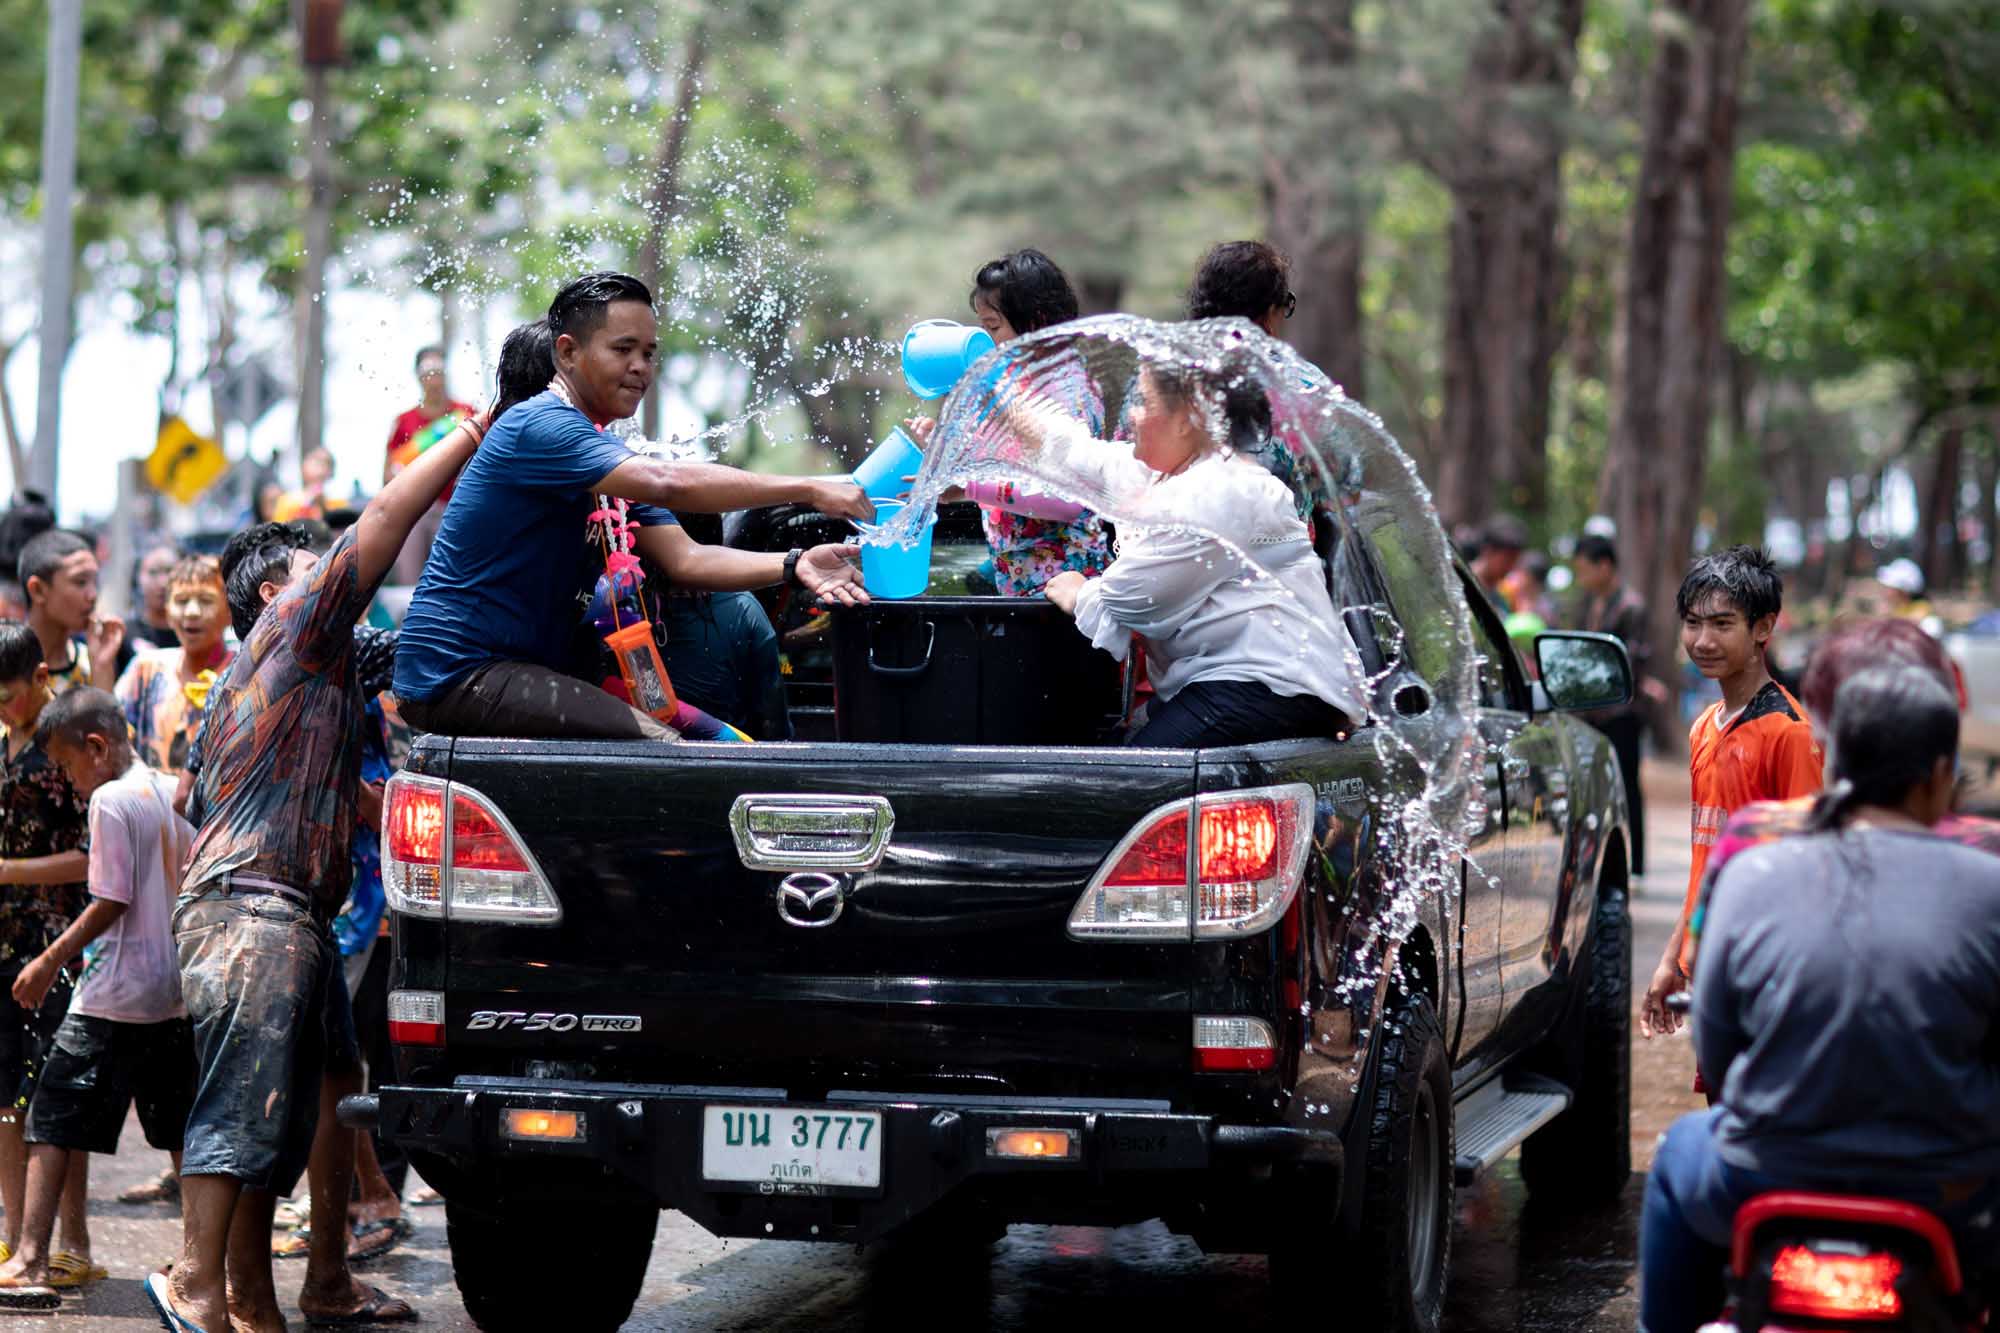 Water fight on the back of a Mazda truck during Songkran water festival in Phuket, Thailand